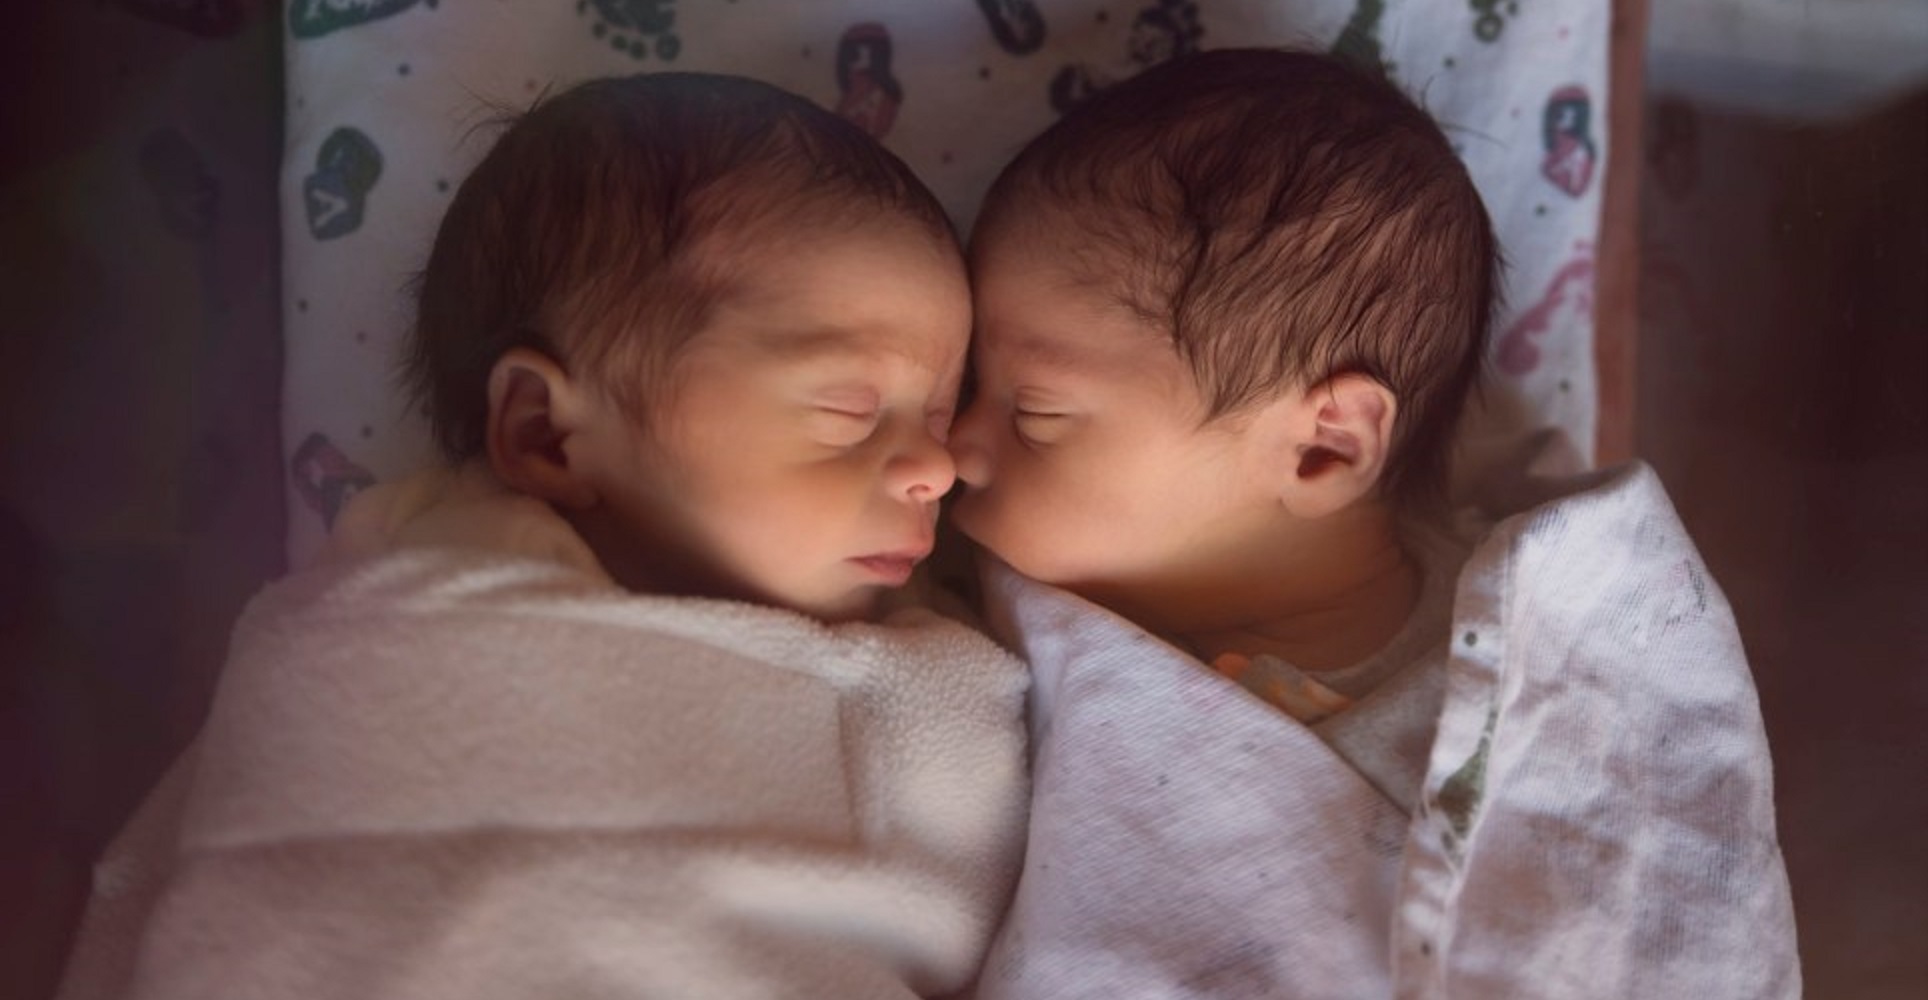 Indian Parents Name Their Newborn Twins ‘Corona’ and ‘Covid’